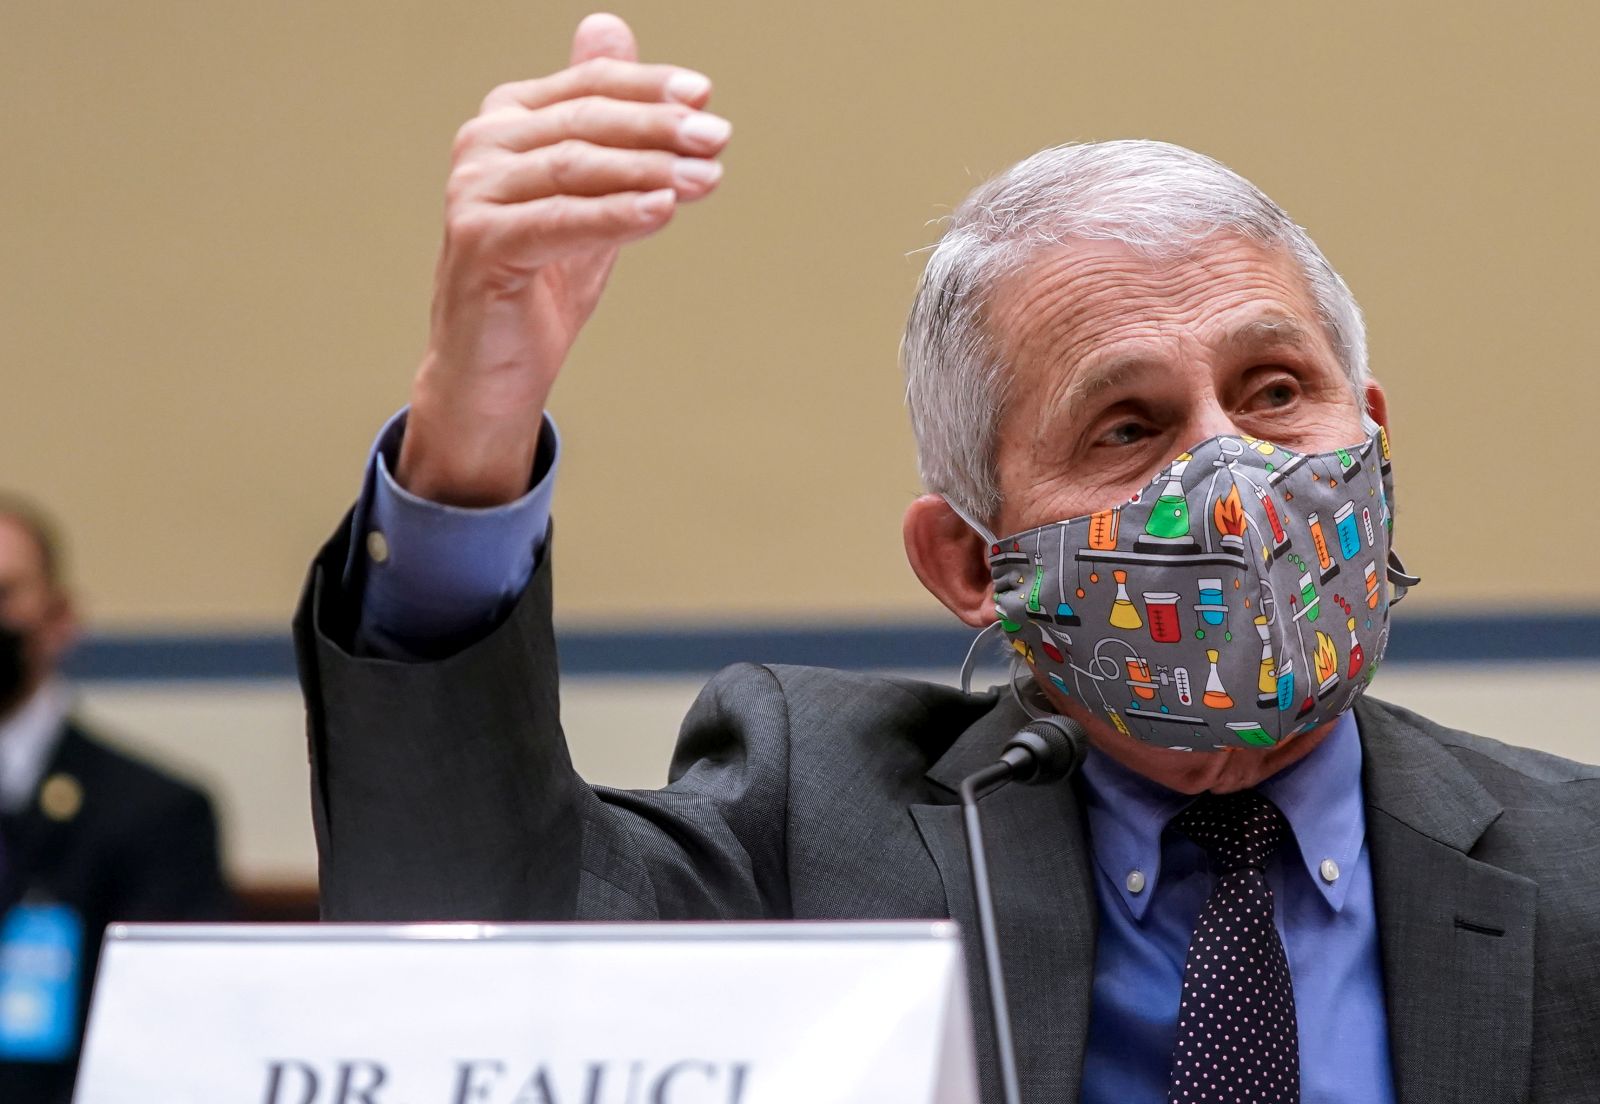 epa09137639 Director of the U.S. National Institute of Allergy and Infectious Diseases (NIAID) Anthony Fauci attends a hearing of the House Select Subcommittee on the Coronavirus Crisis on the Capitol Hill in Washington, DC, USA, 15 April 2021.  EPA/AMR ALFIKY / POOL